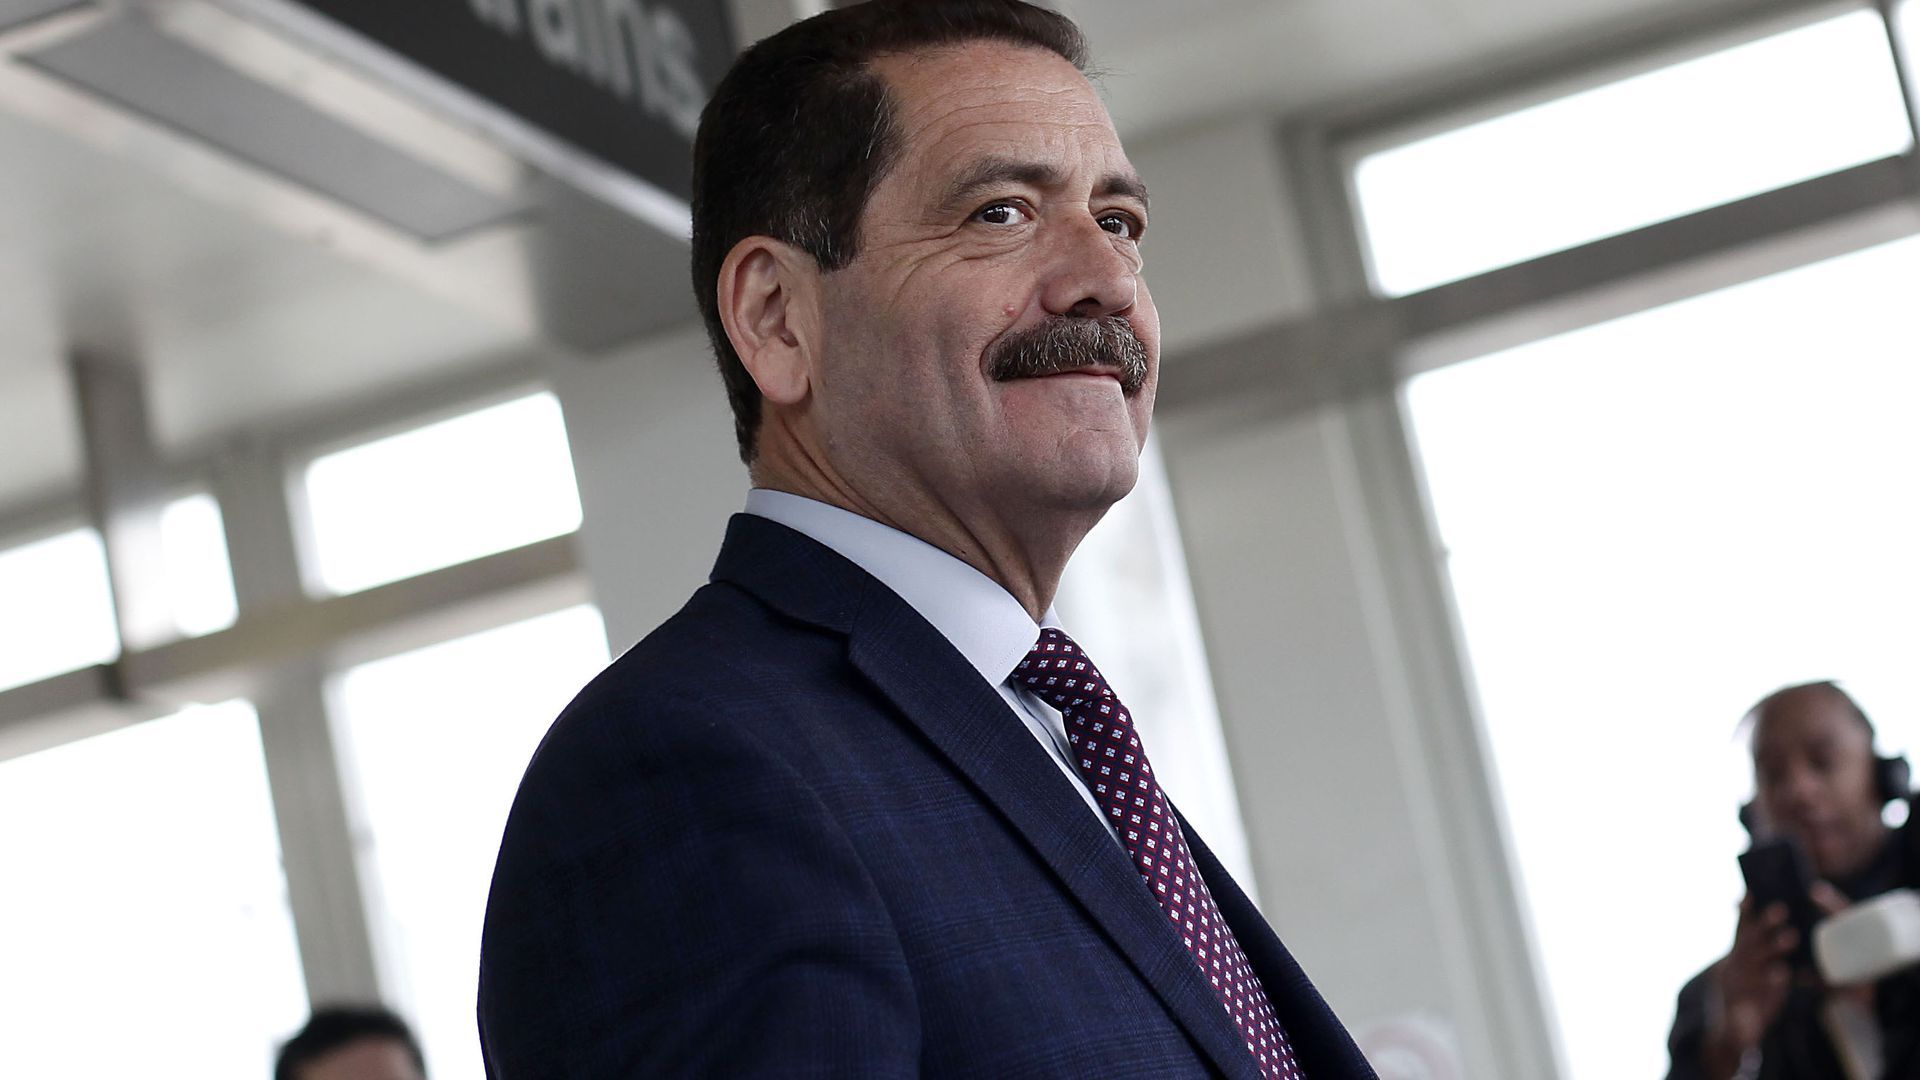  Jesús "Chuy" García smiles while wearing a dark blue suit and a red patterned tie.